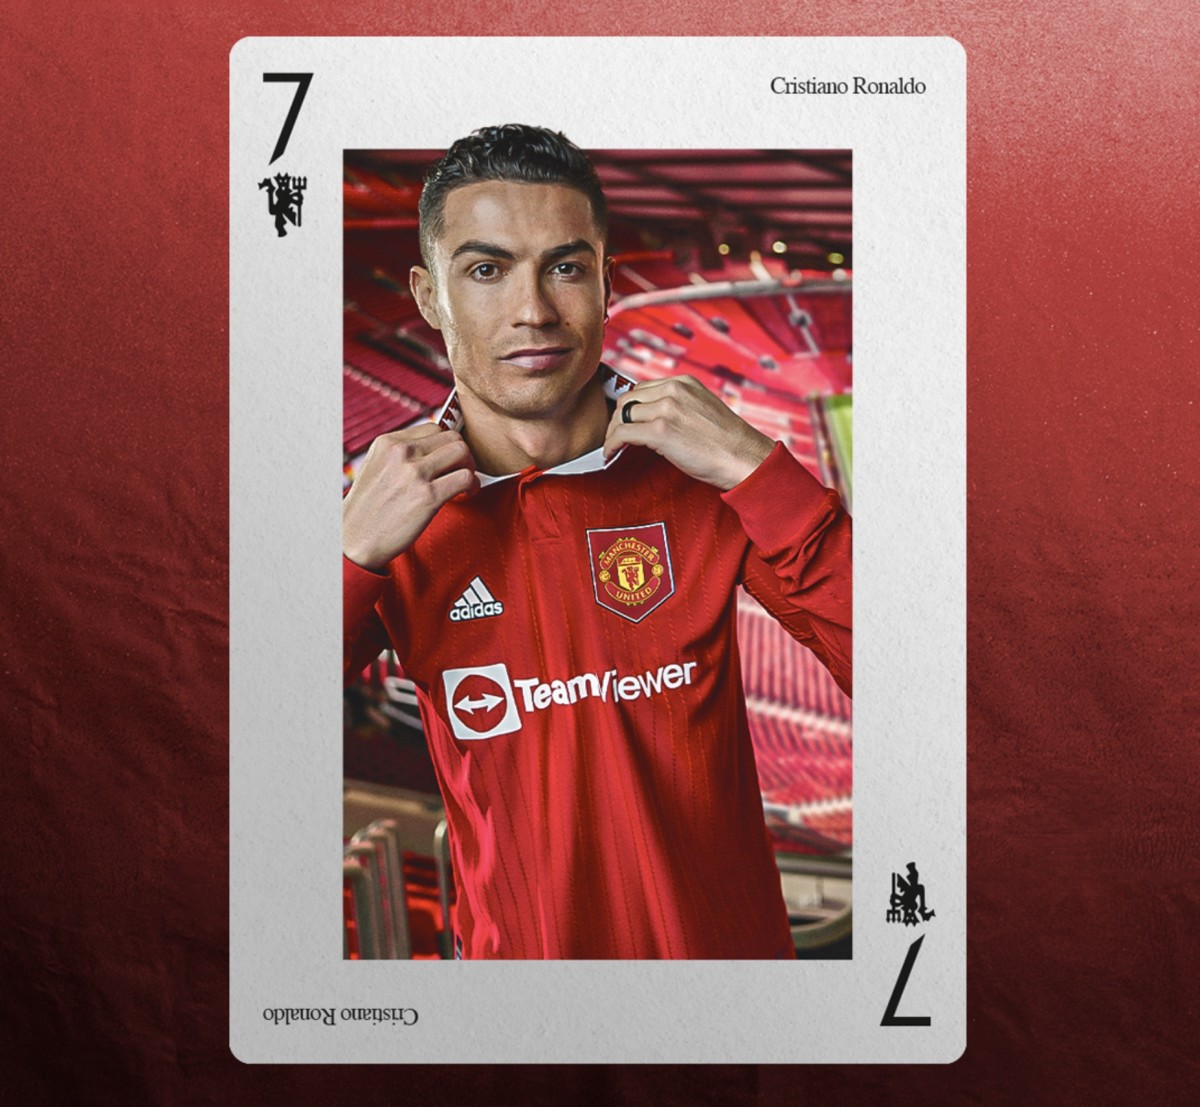 Cristiano Ronaldo pictured wearing Manchester United's new home jersey in official promotional material published in July 2022